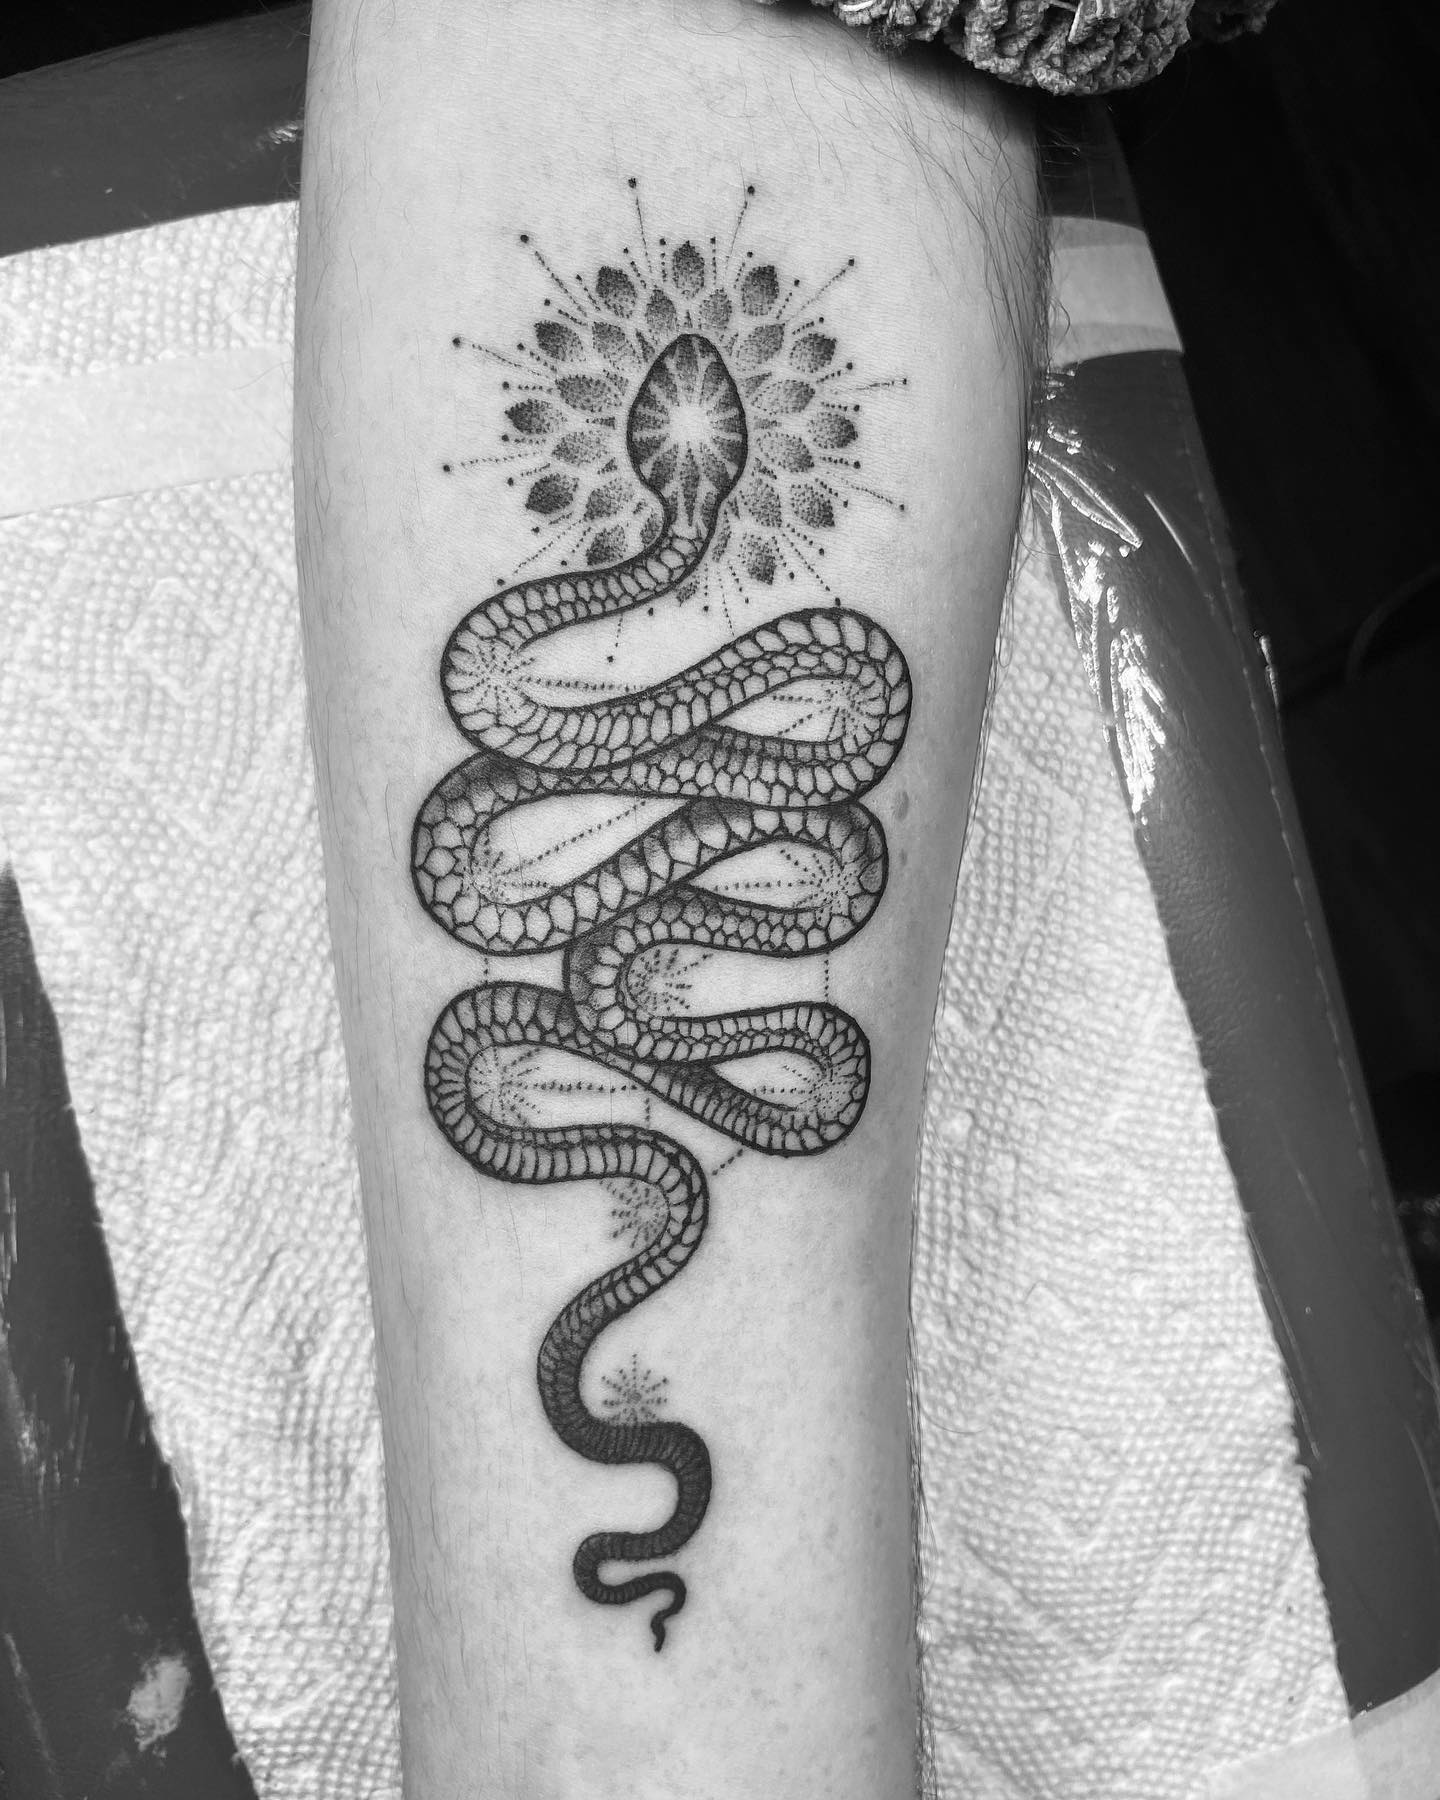 Snake tattoo Serpent with sacred geometry and Kaballah tree of life